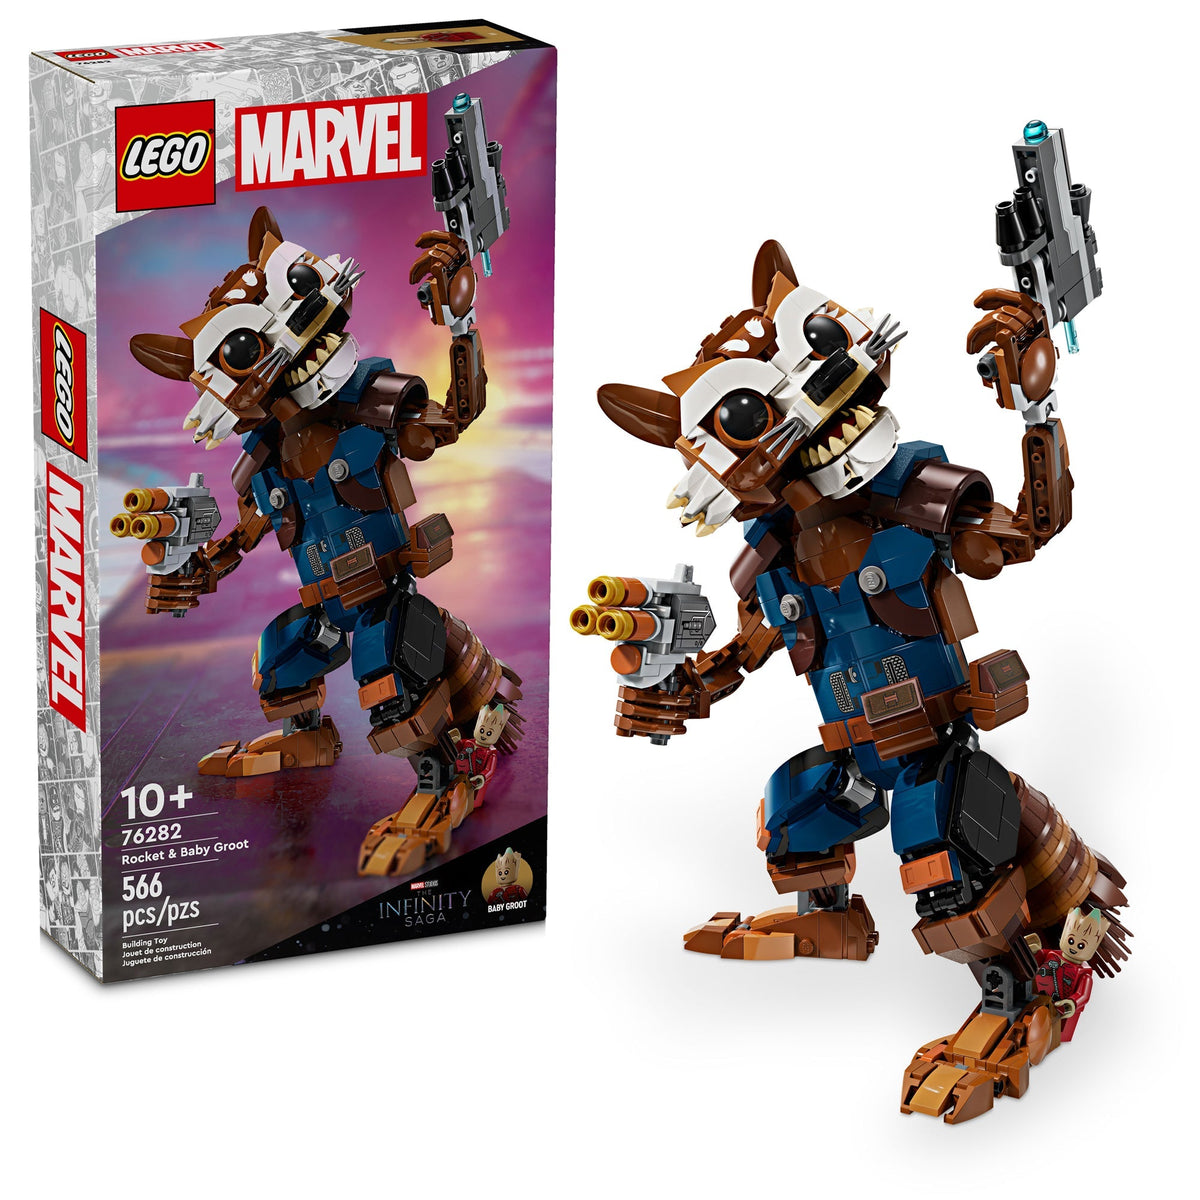 LEGO Toys & Games LEGO Marvel Rocket & Baby Groot, 76282, Ages 10+, 566 Pieces 673419390910